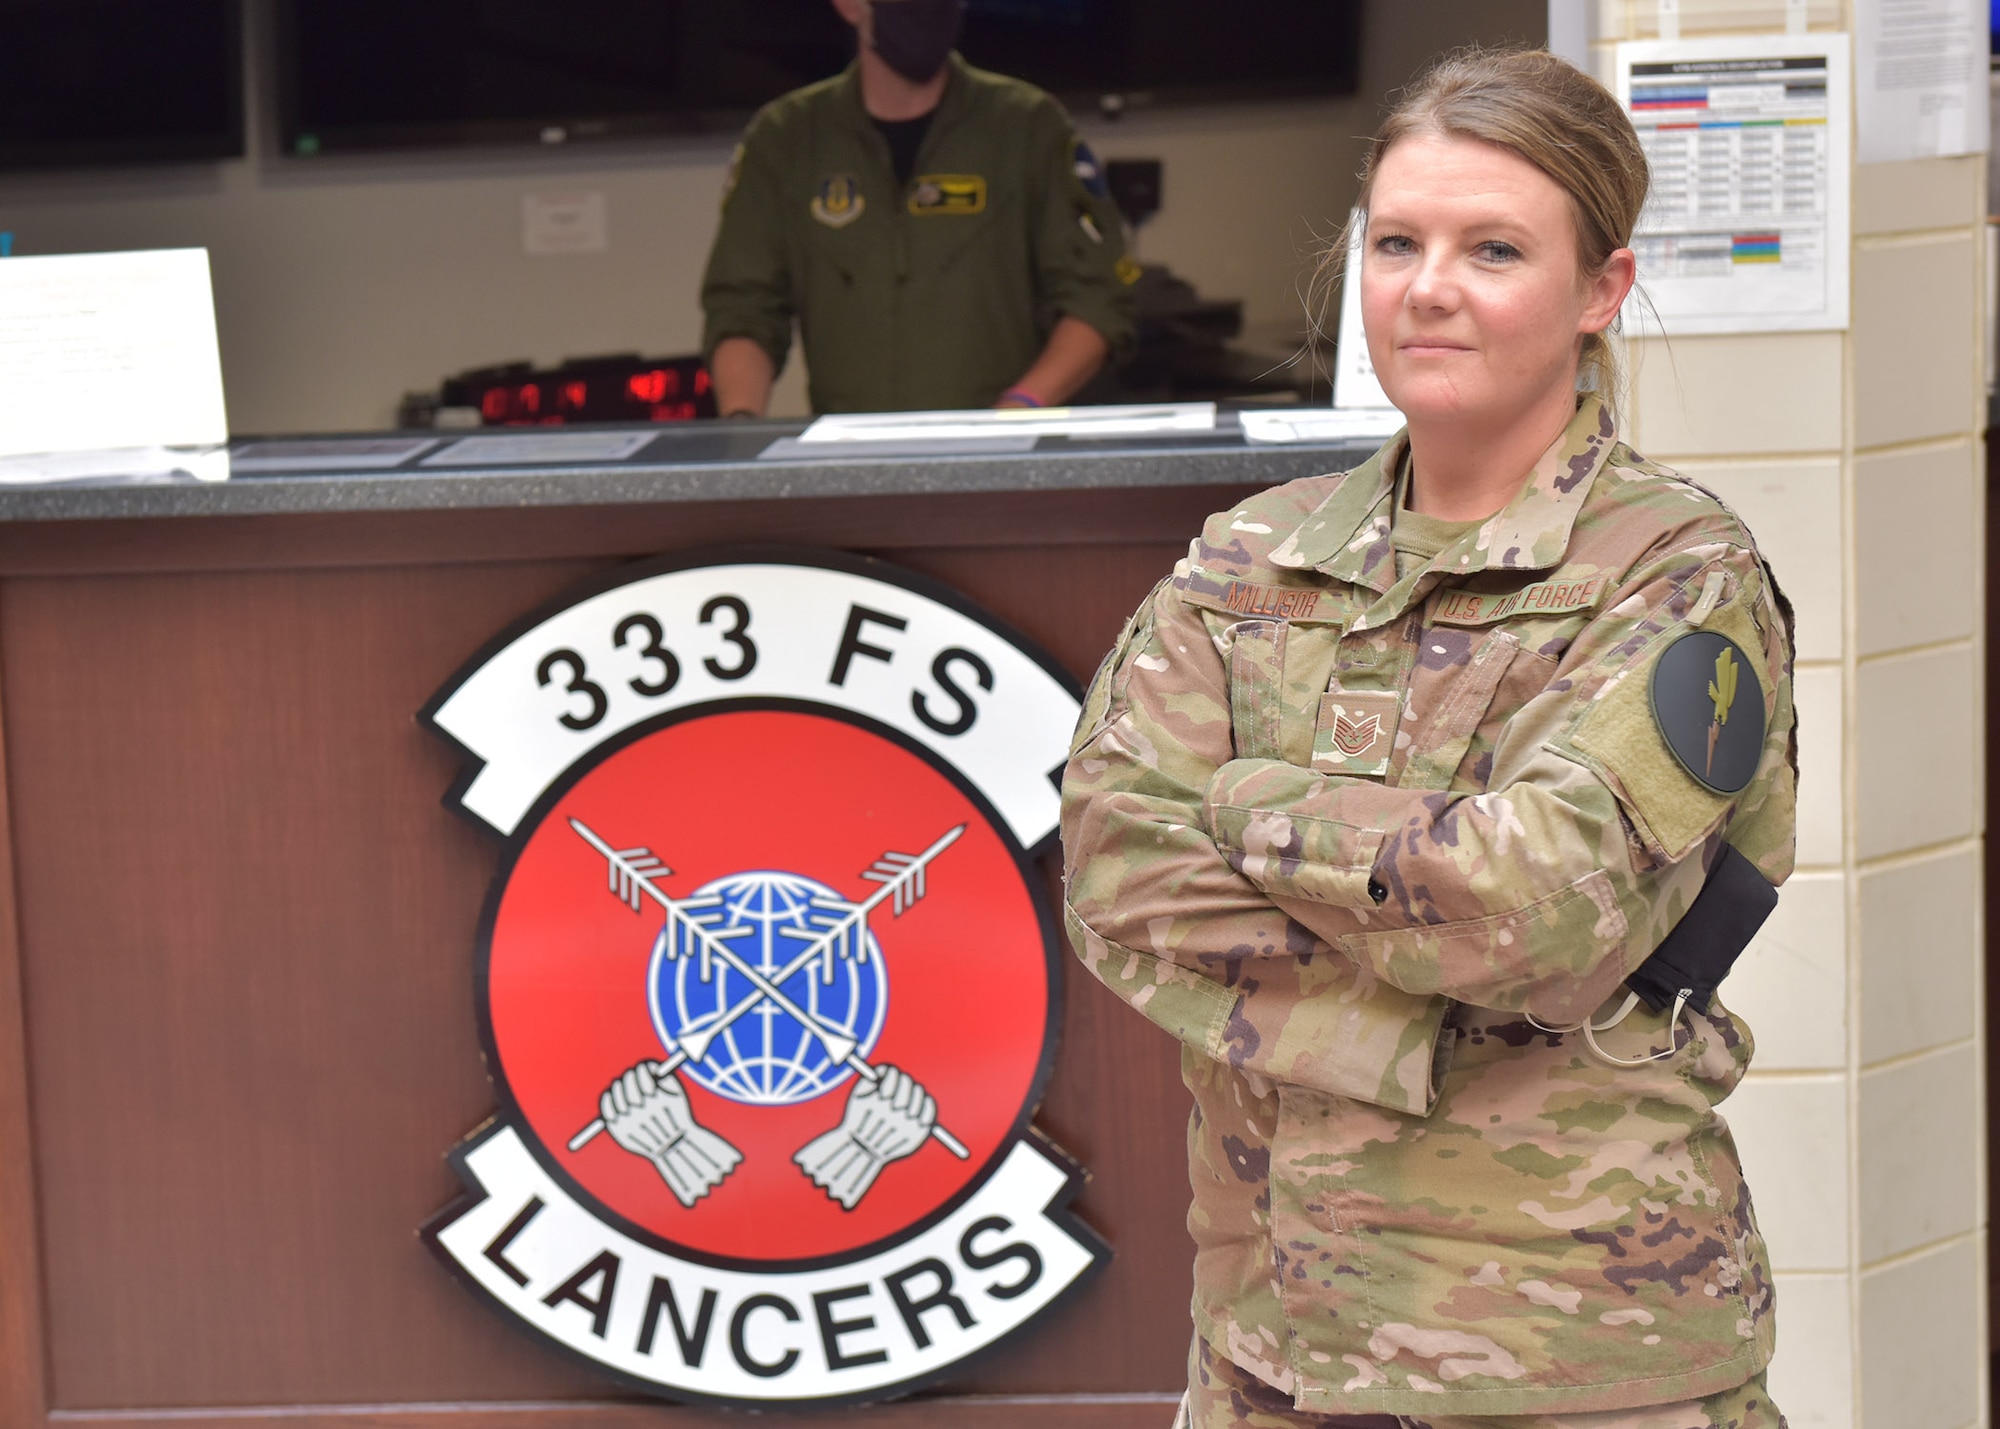 The September 944th Fighter Wing Warrior of the Month is Tech. Sgt. Tiffany Millisor, 307th Fighter Squadron aviation resource manager.